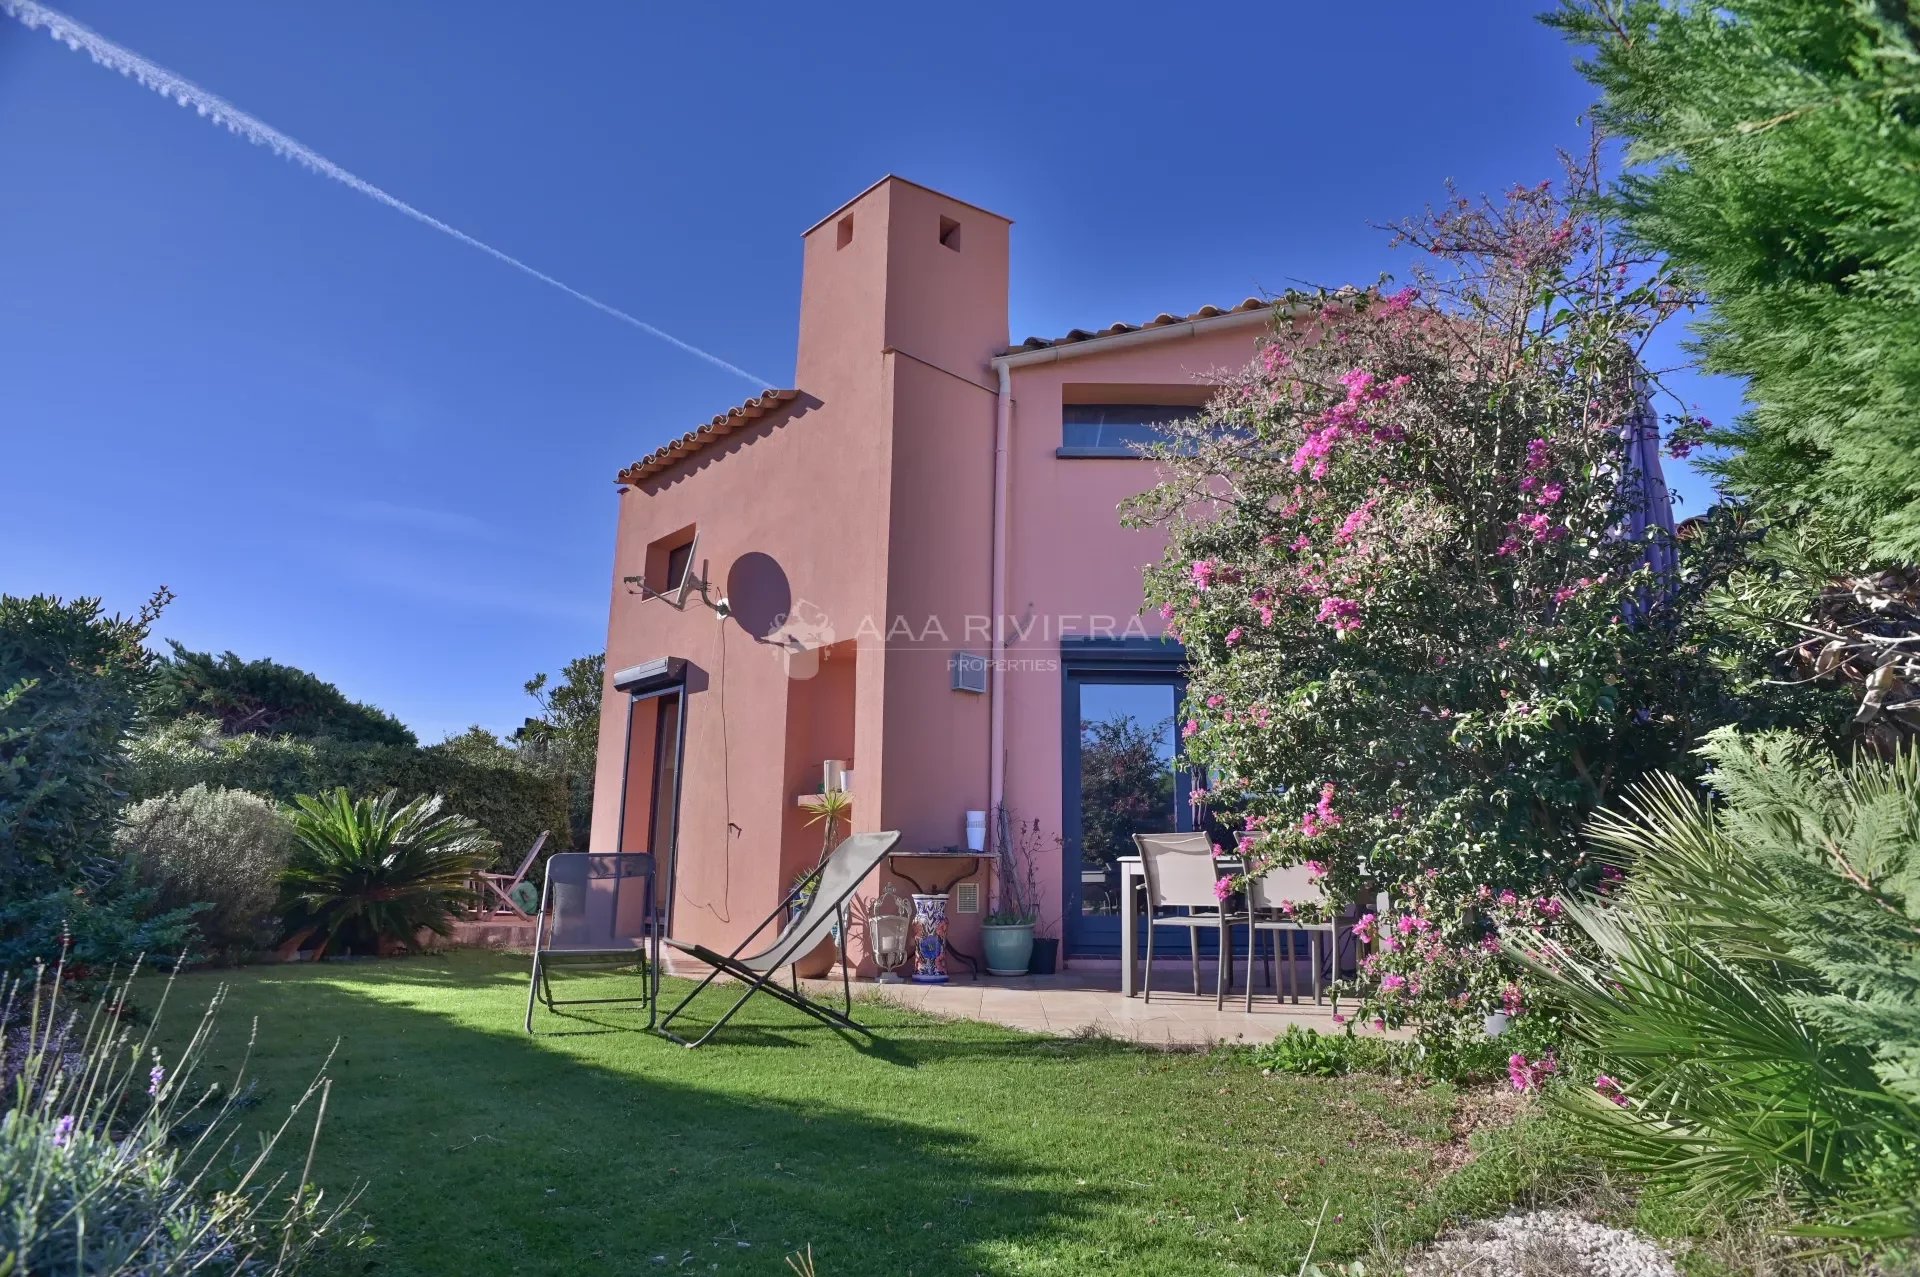 SHARE SOLE AGENT - Between Biot and Valbonne - VAL D'AZUR : Beautiful villa in sought-after gated estate with swimming pool and tennis court. Glimt of the sea